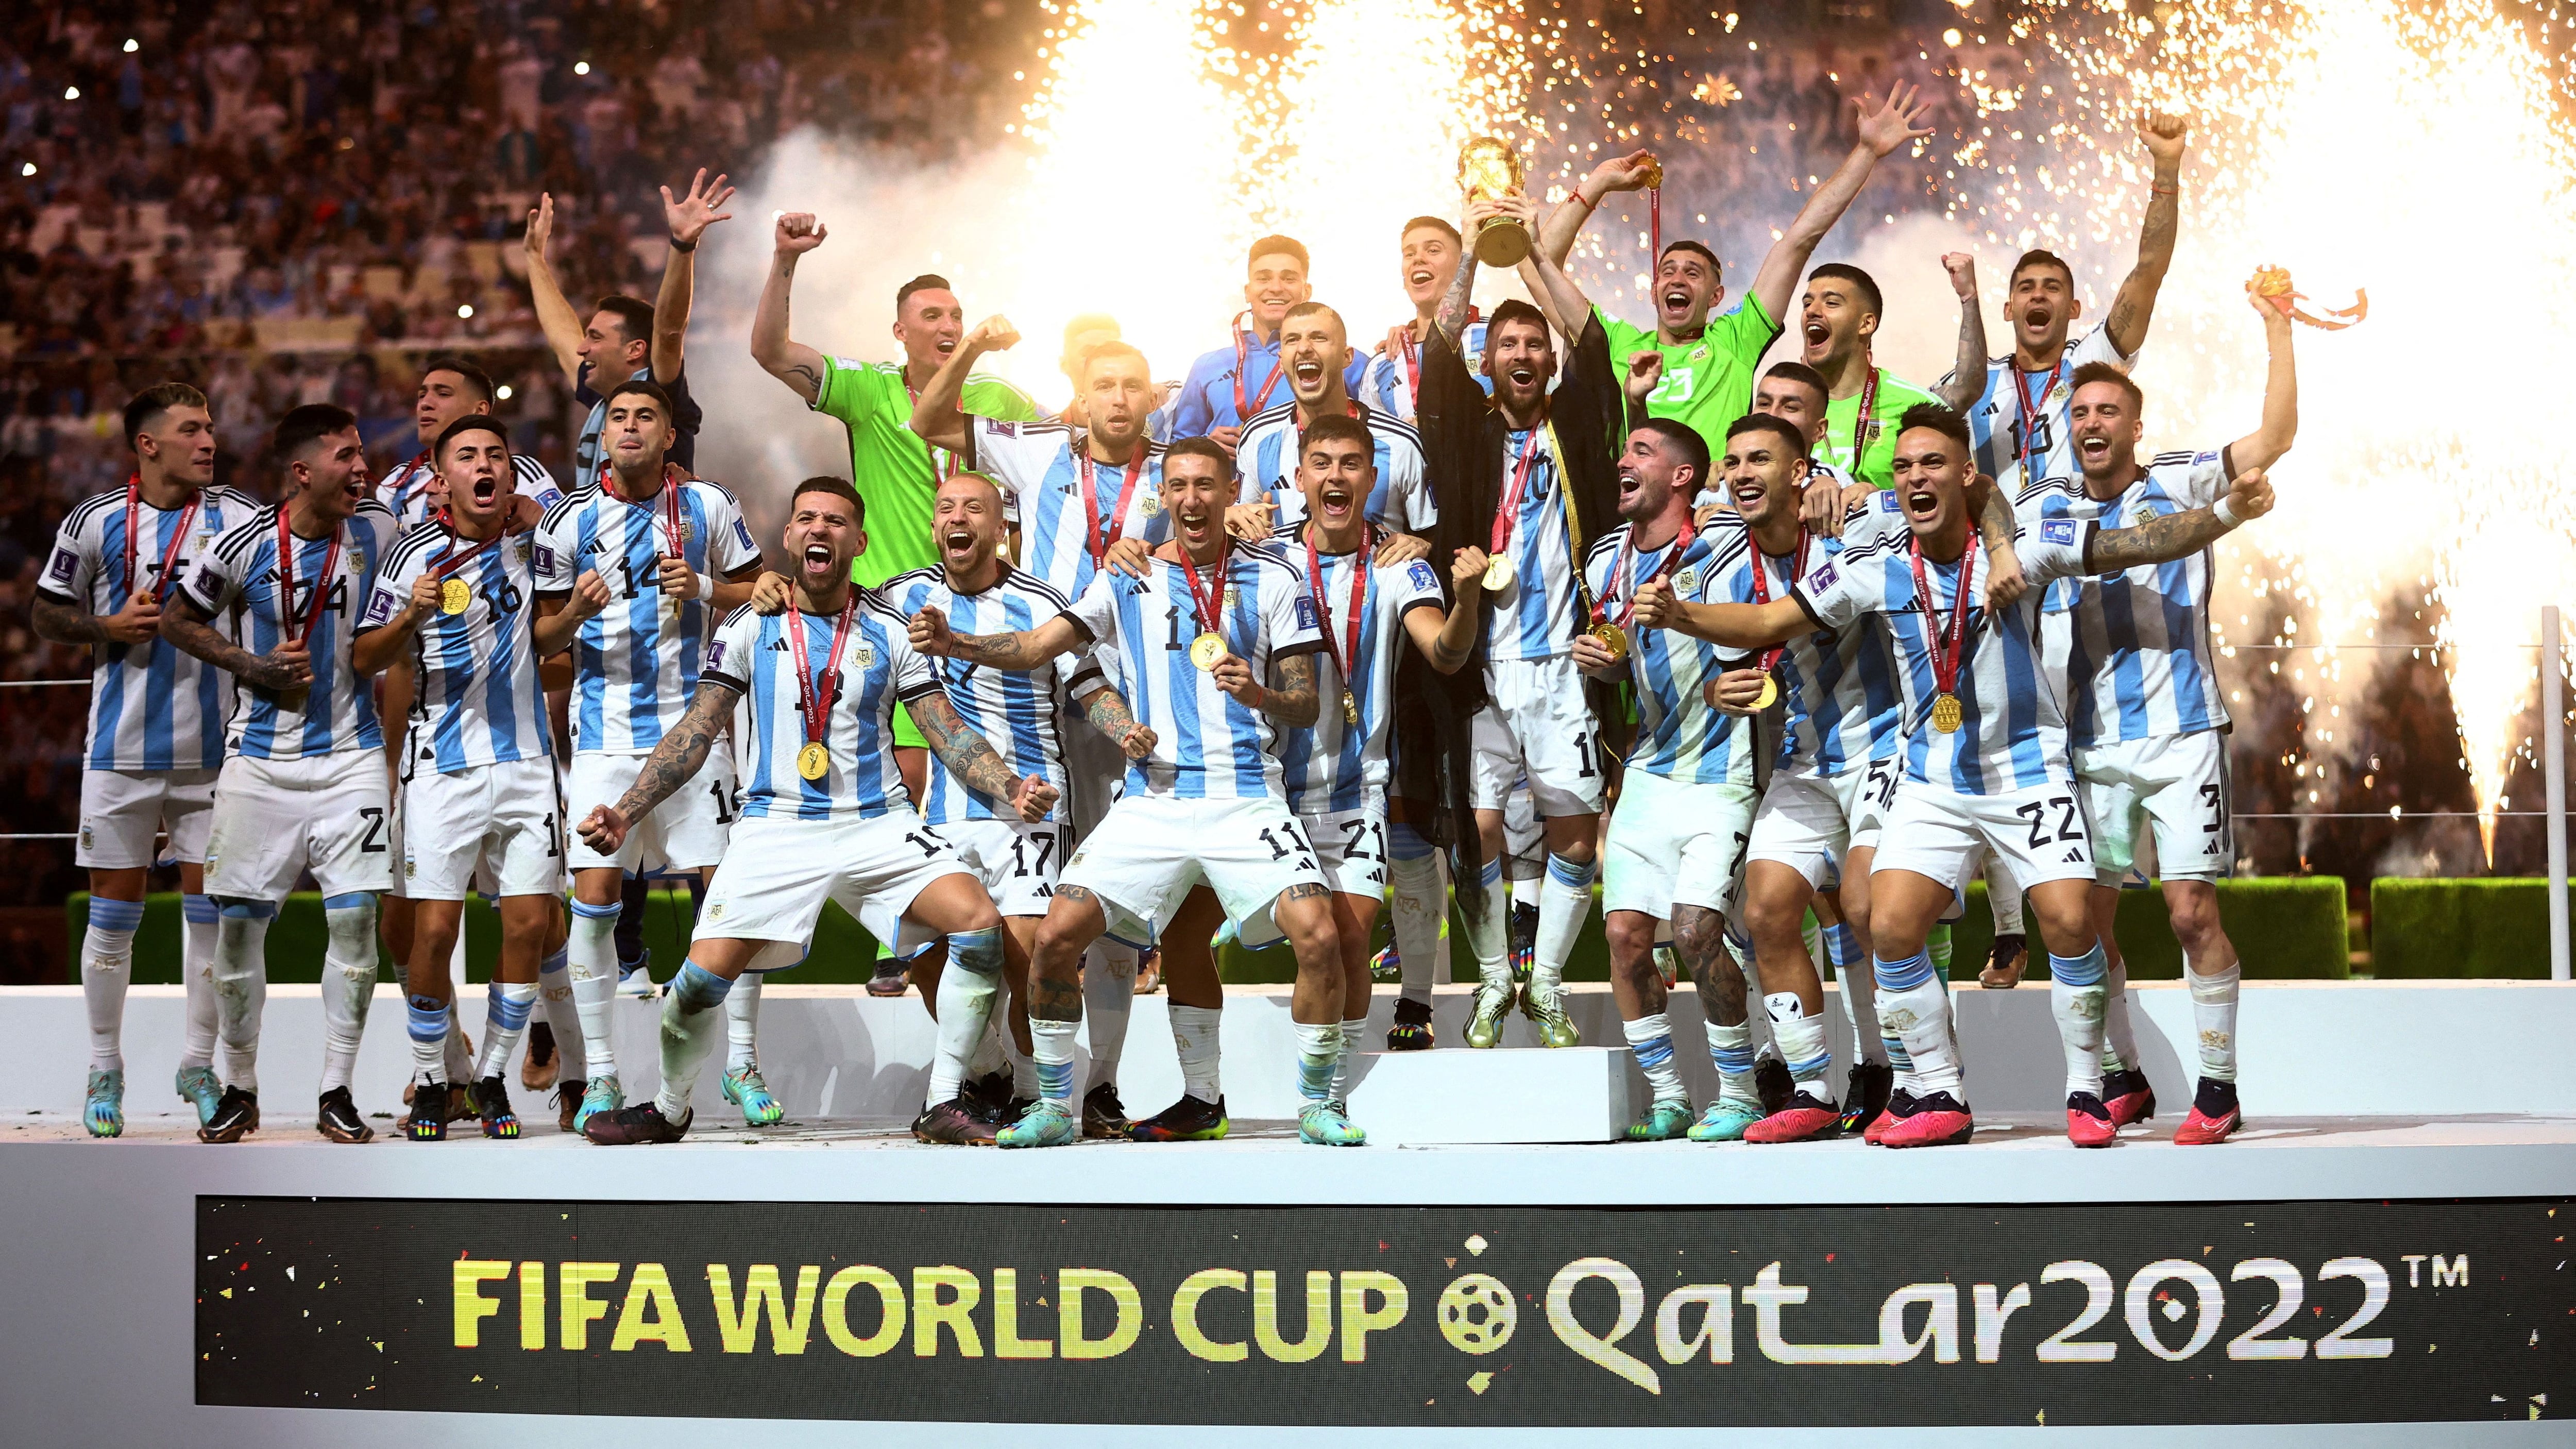 The champions will play a game in Argentina again after having won the World Cup in Qatar (Reuters)
